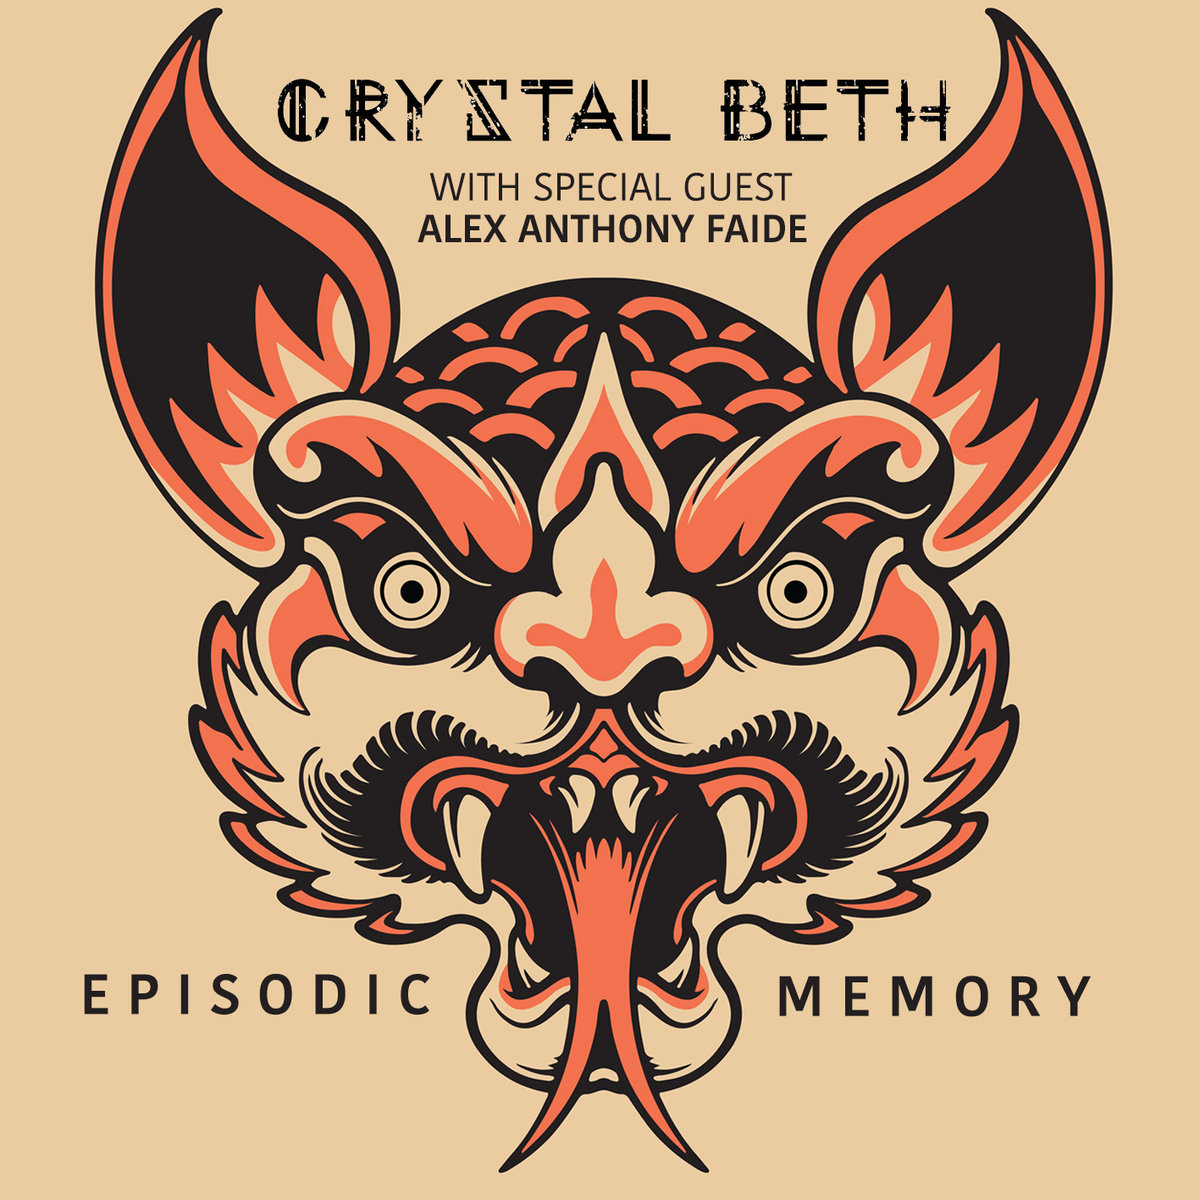 Crystal Beth with special guest Alex Anthony Faide: Episodic Memory